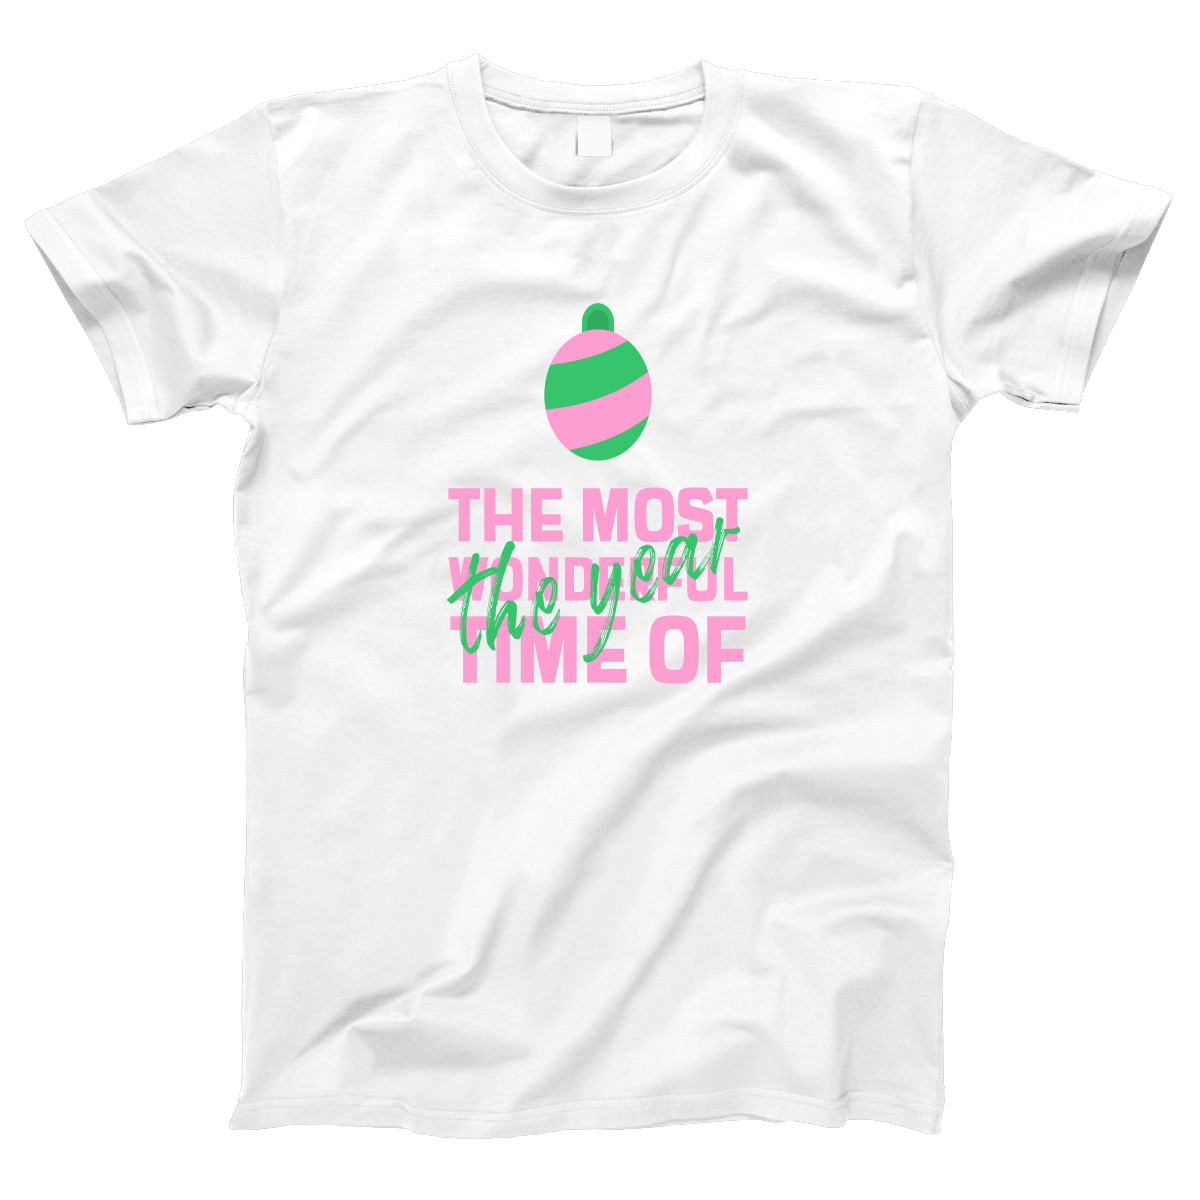 The Most Wonderful Time of the Year Women's T-shirt | White